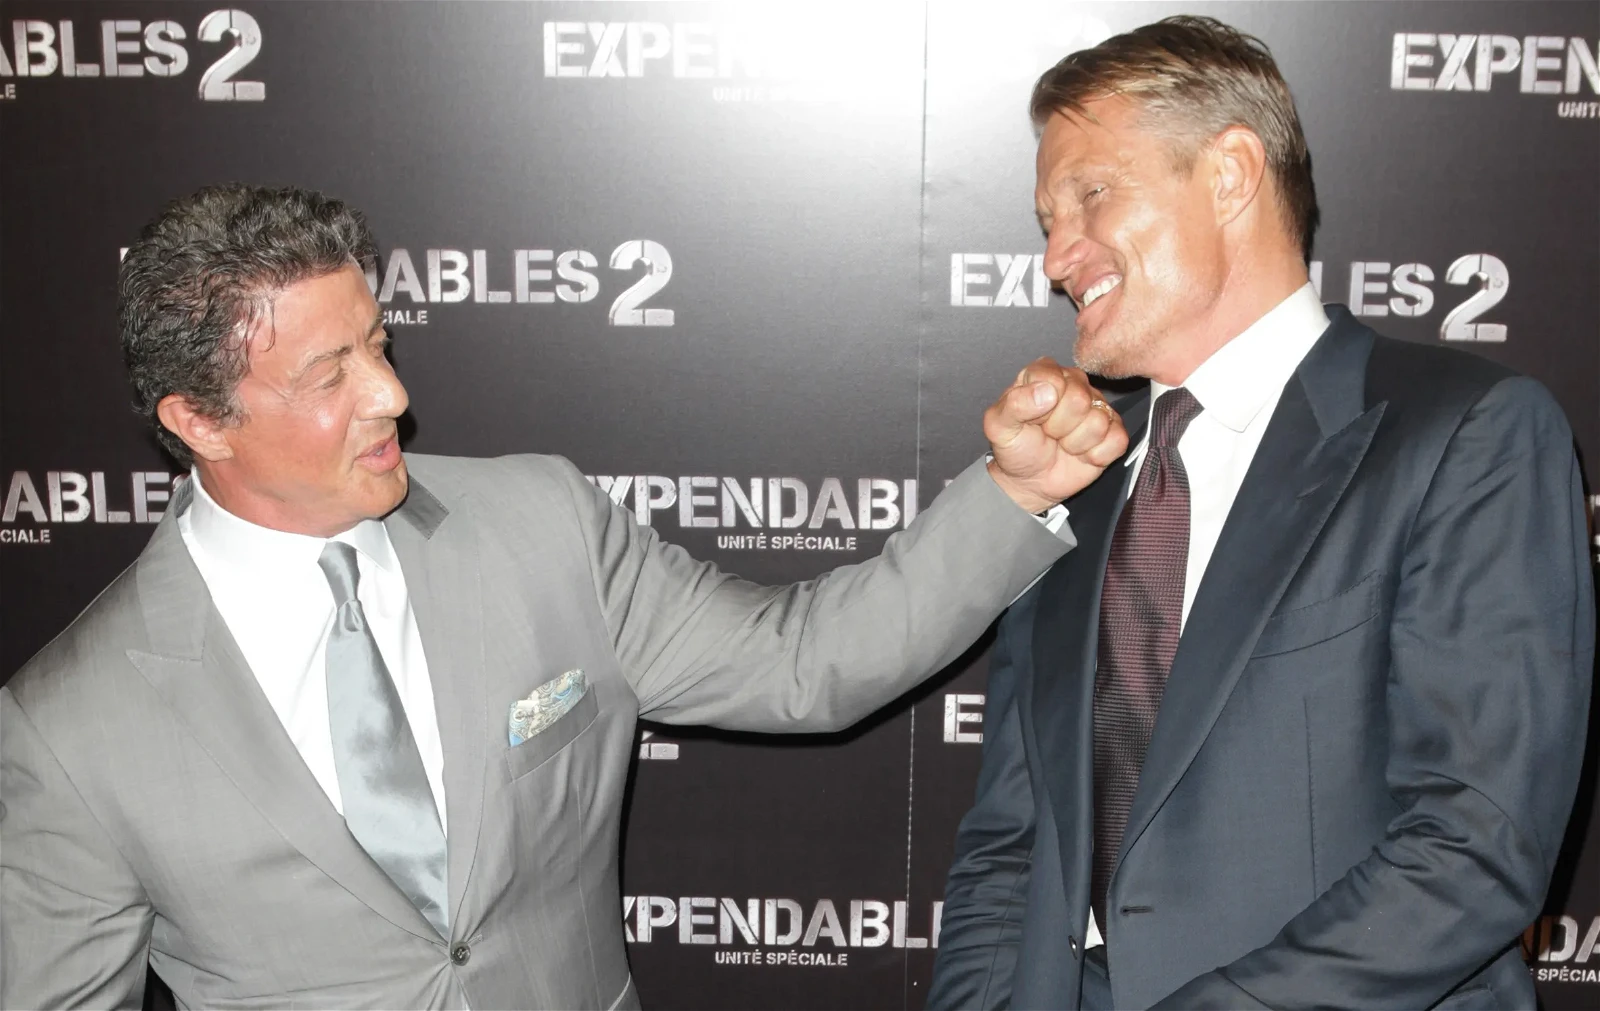 Sylvester Stallone and Dolph Lundgren at an event